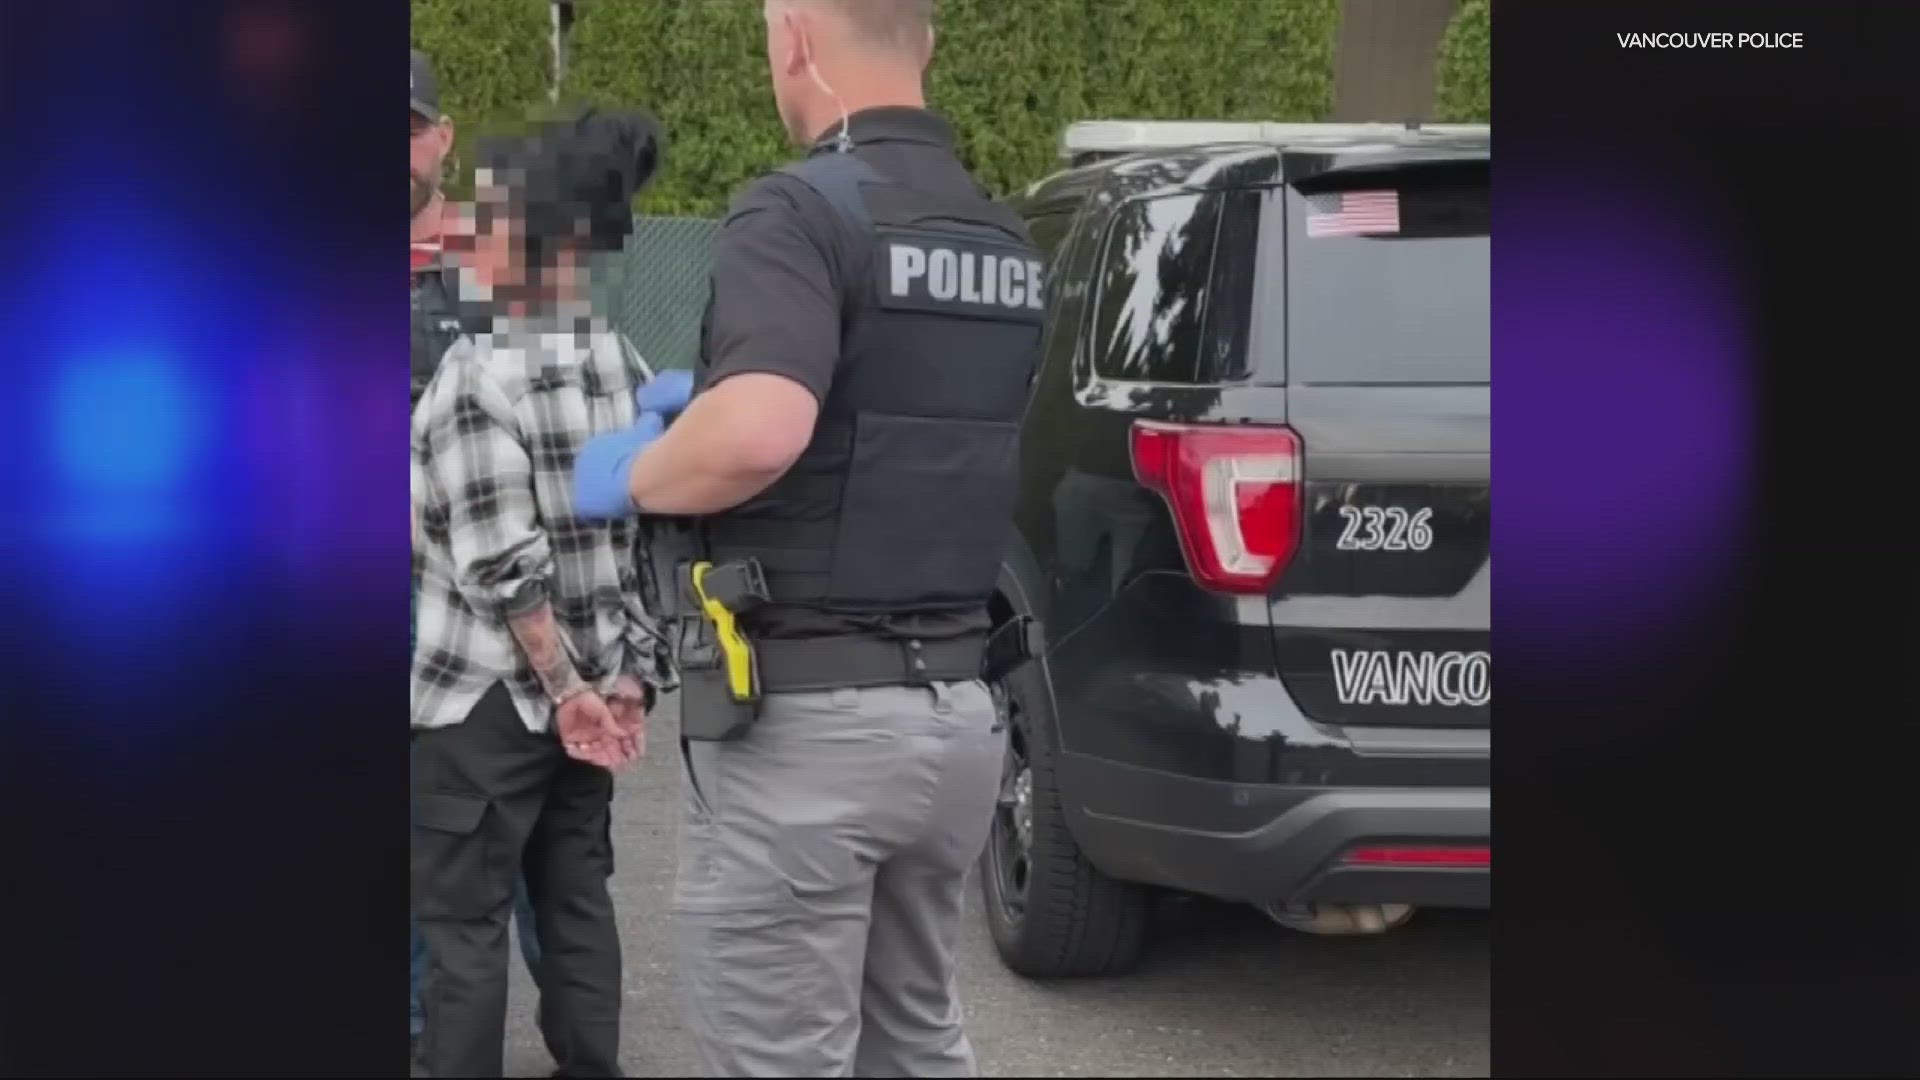 More than a dozen arrests were reported and several vehicles were seized during a multi-agency stolen vehicle operation this weekend.